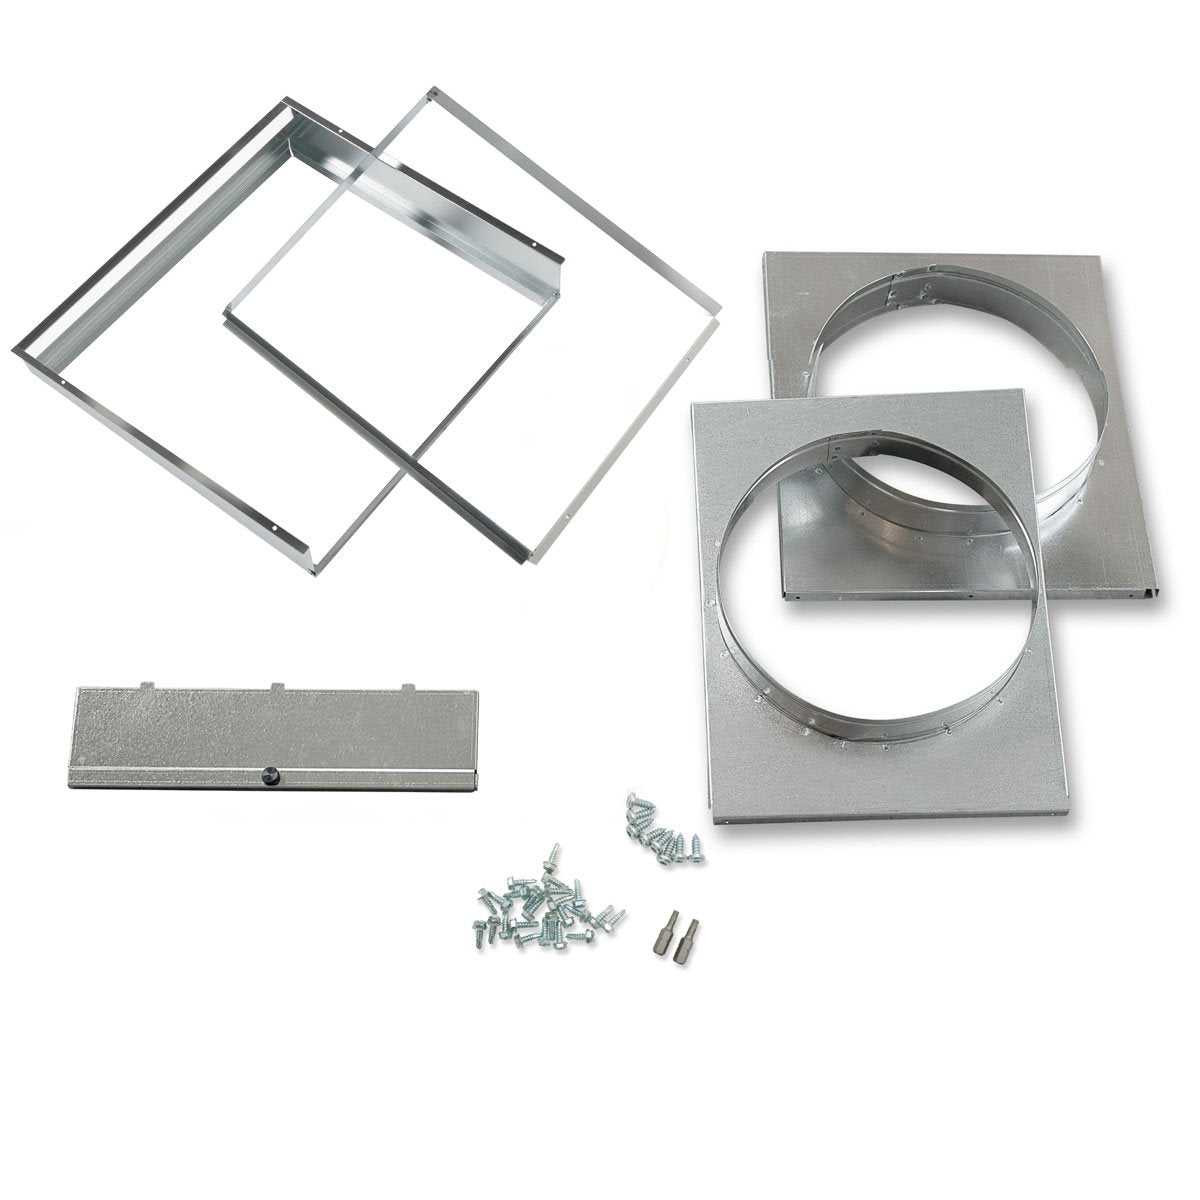 Anden Ducting Kit for Dehumidifier A210